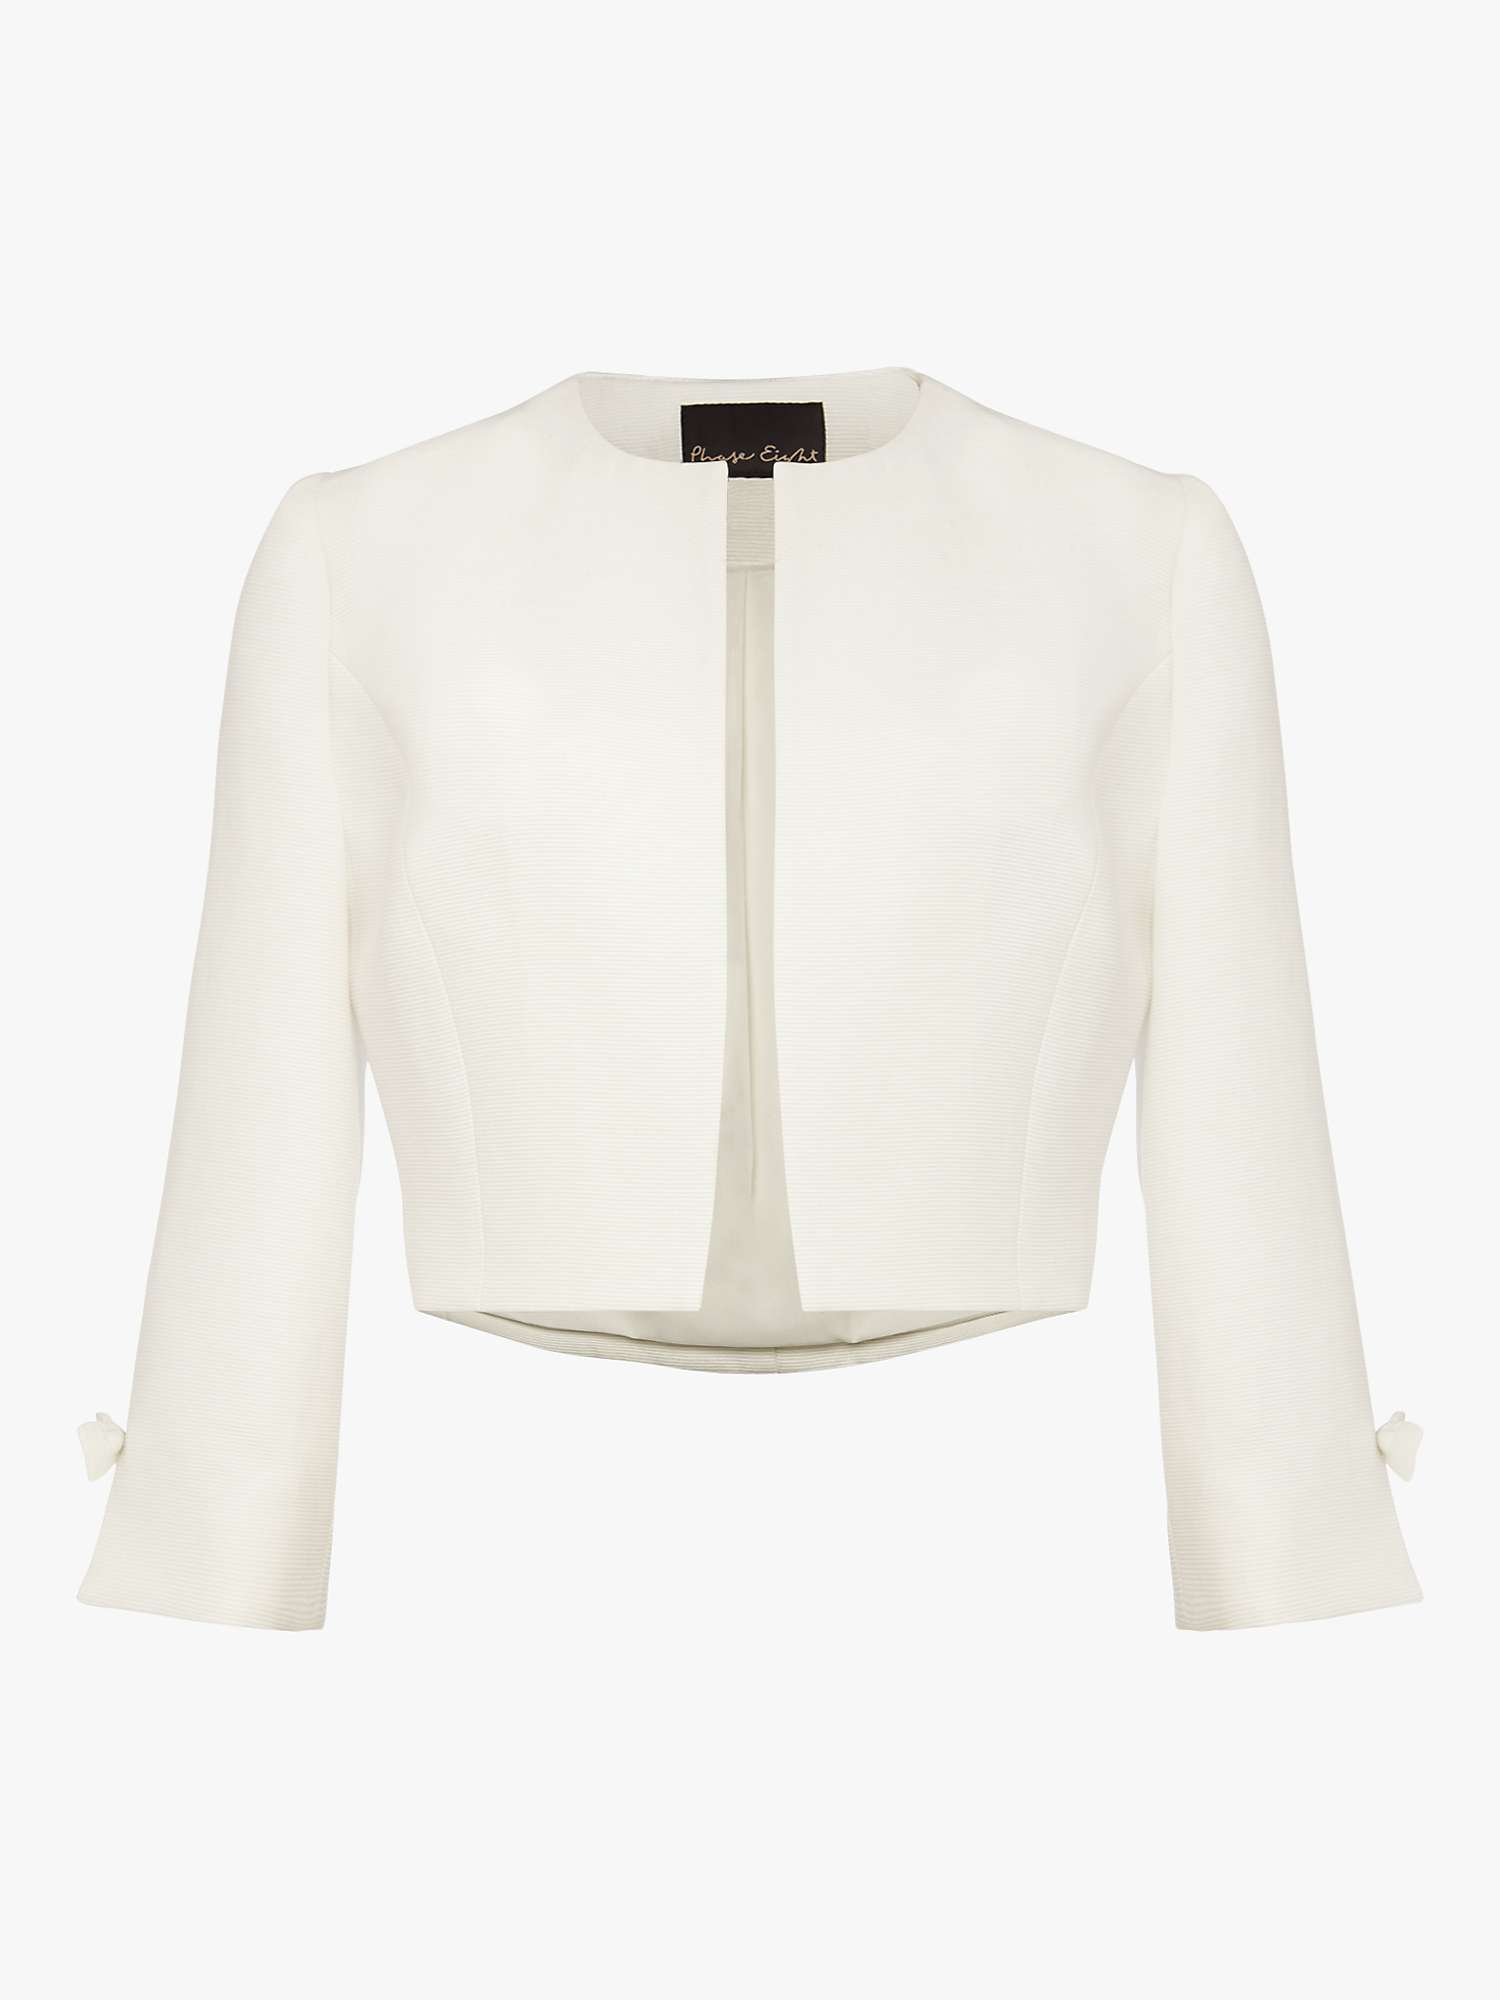 Buy Phase Eight Zoelle Bow Detail Cuff Jacket Online at johnlewis.com